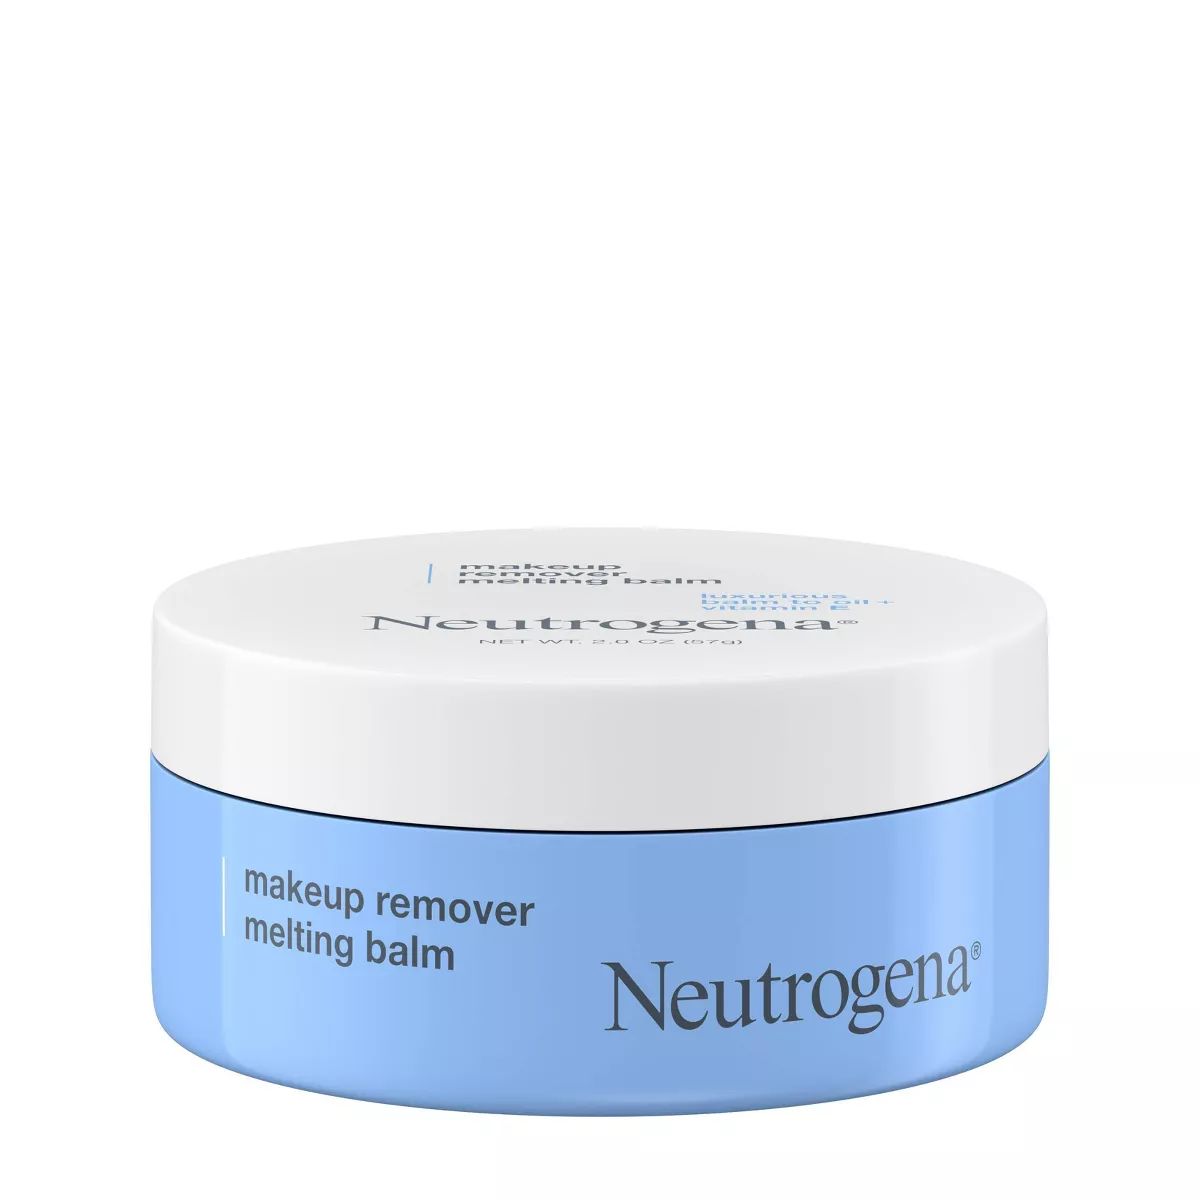 Neutrogena Makeup Remover Melting Balm with Vitamin E for Eyes, Lips or Face Makeup - 2.0oz | Target